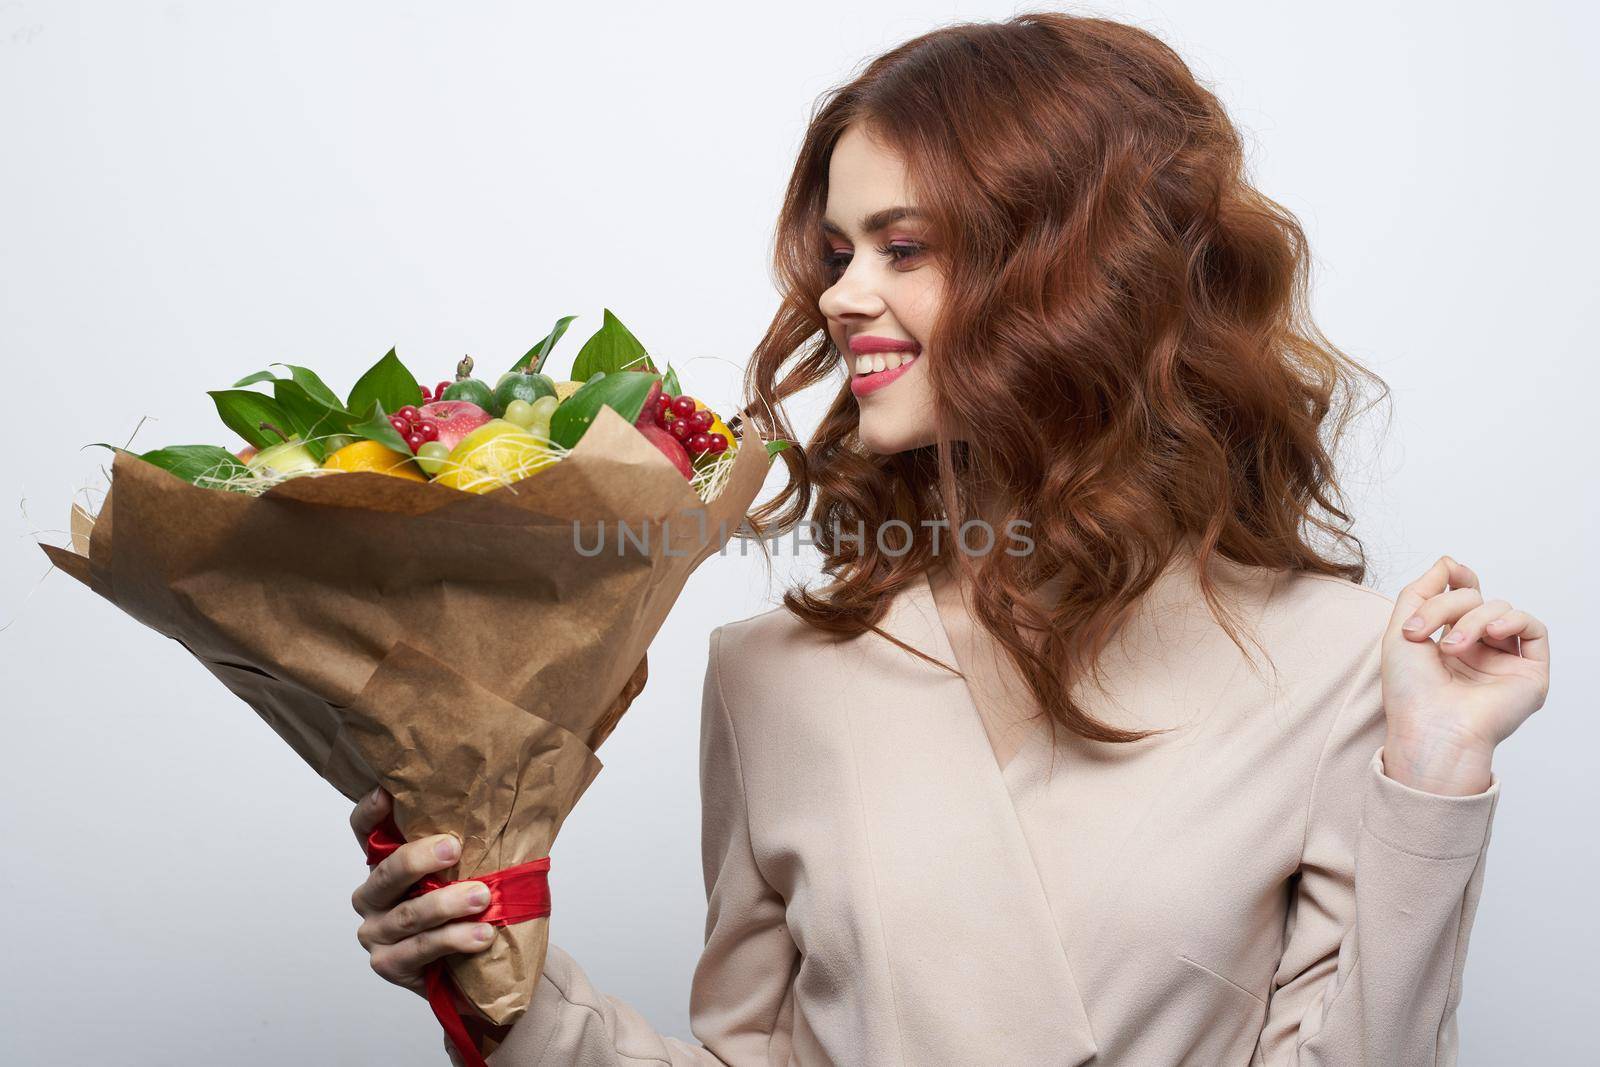 cheerful woman smile posing fresh fruits bouquet emotions light background by Vichizh